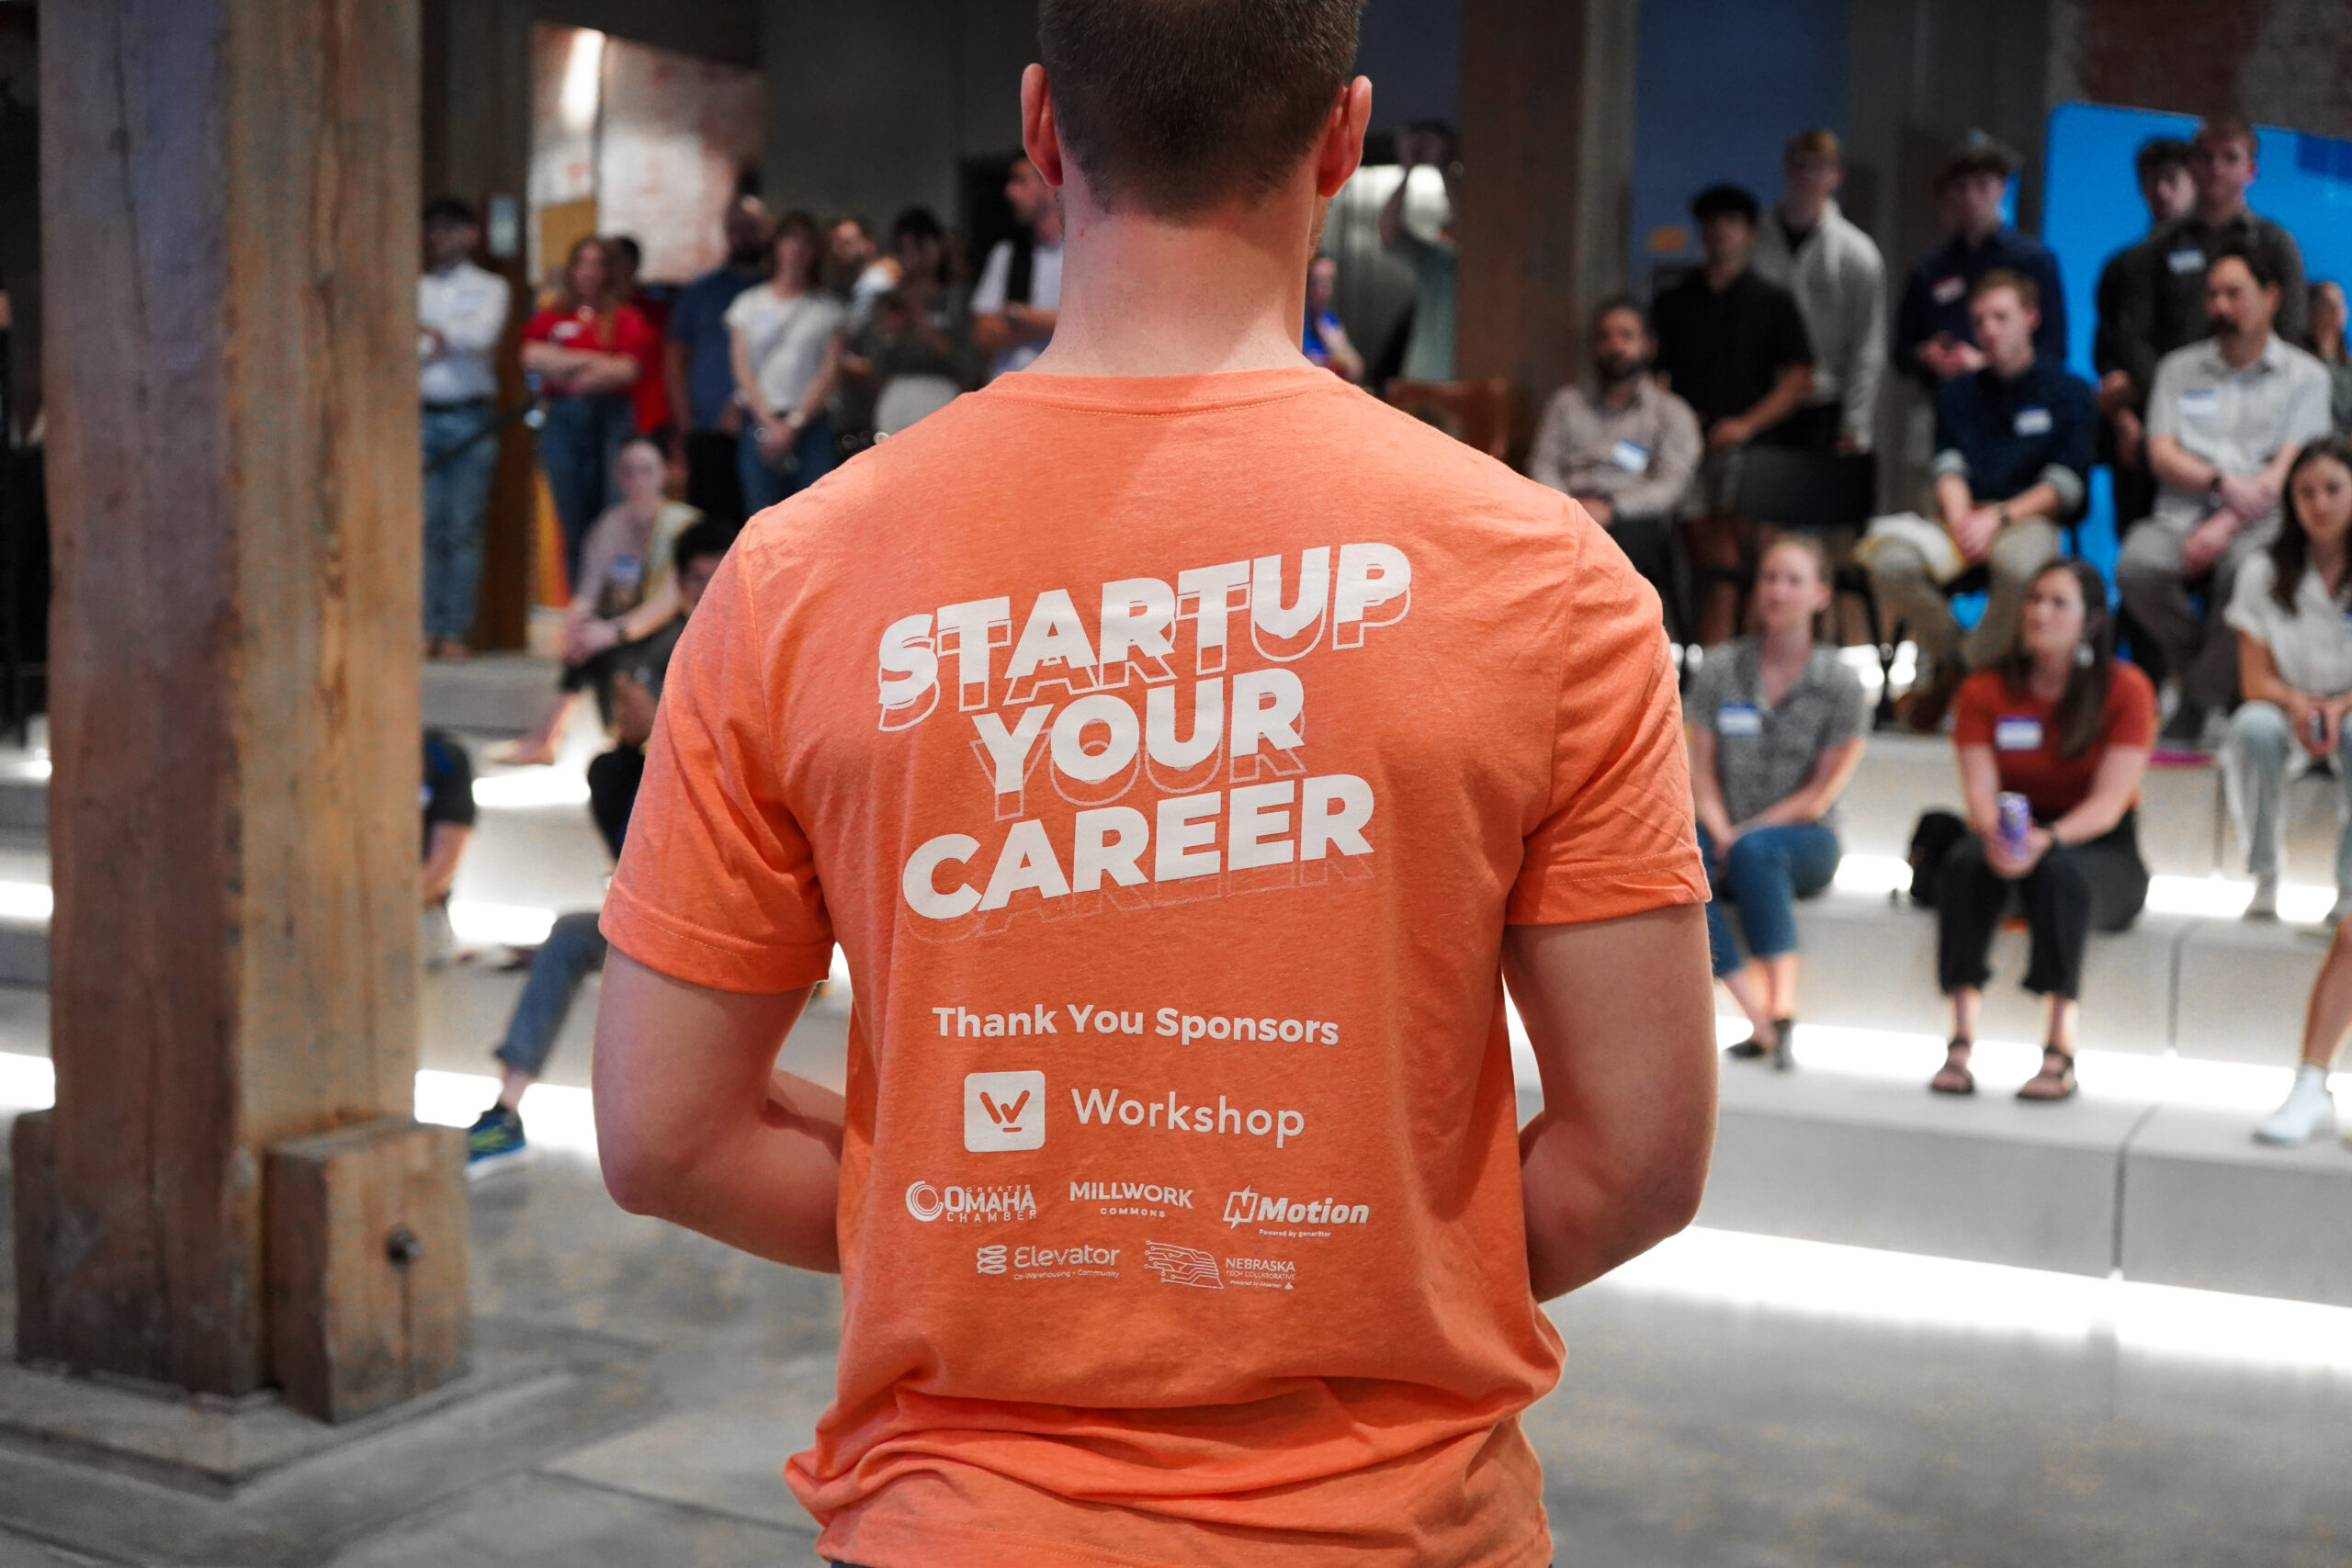 The Startup Job Mixer is coming to Lincoln